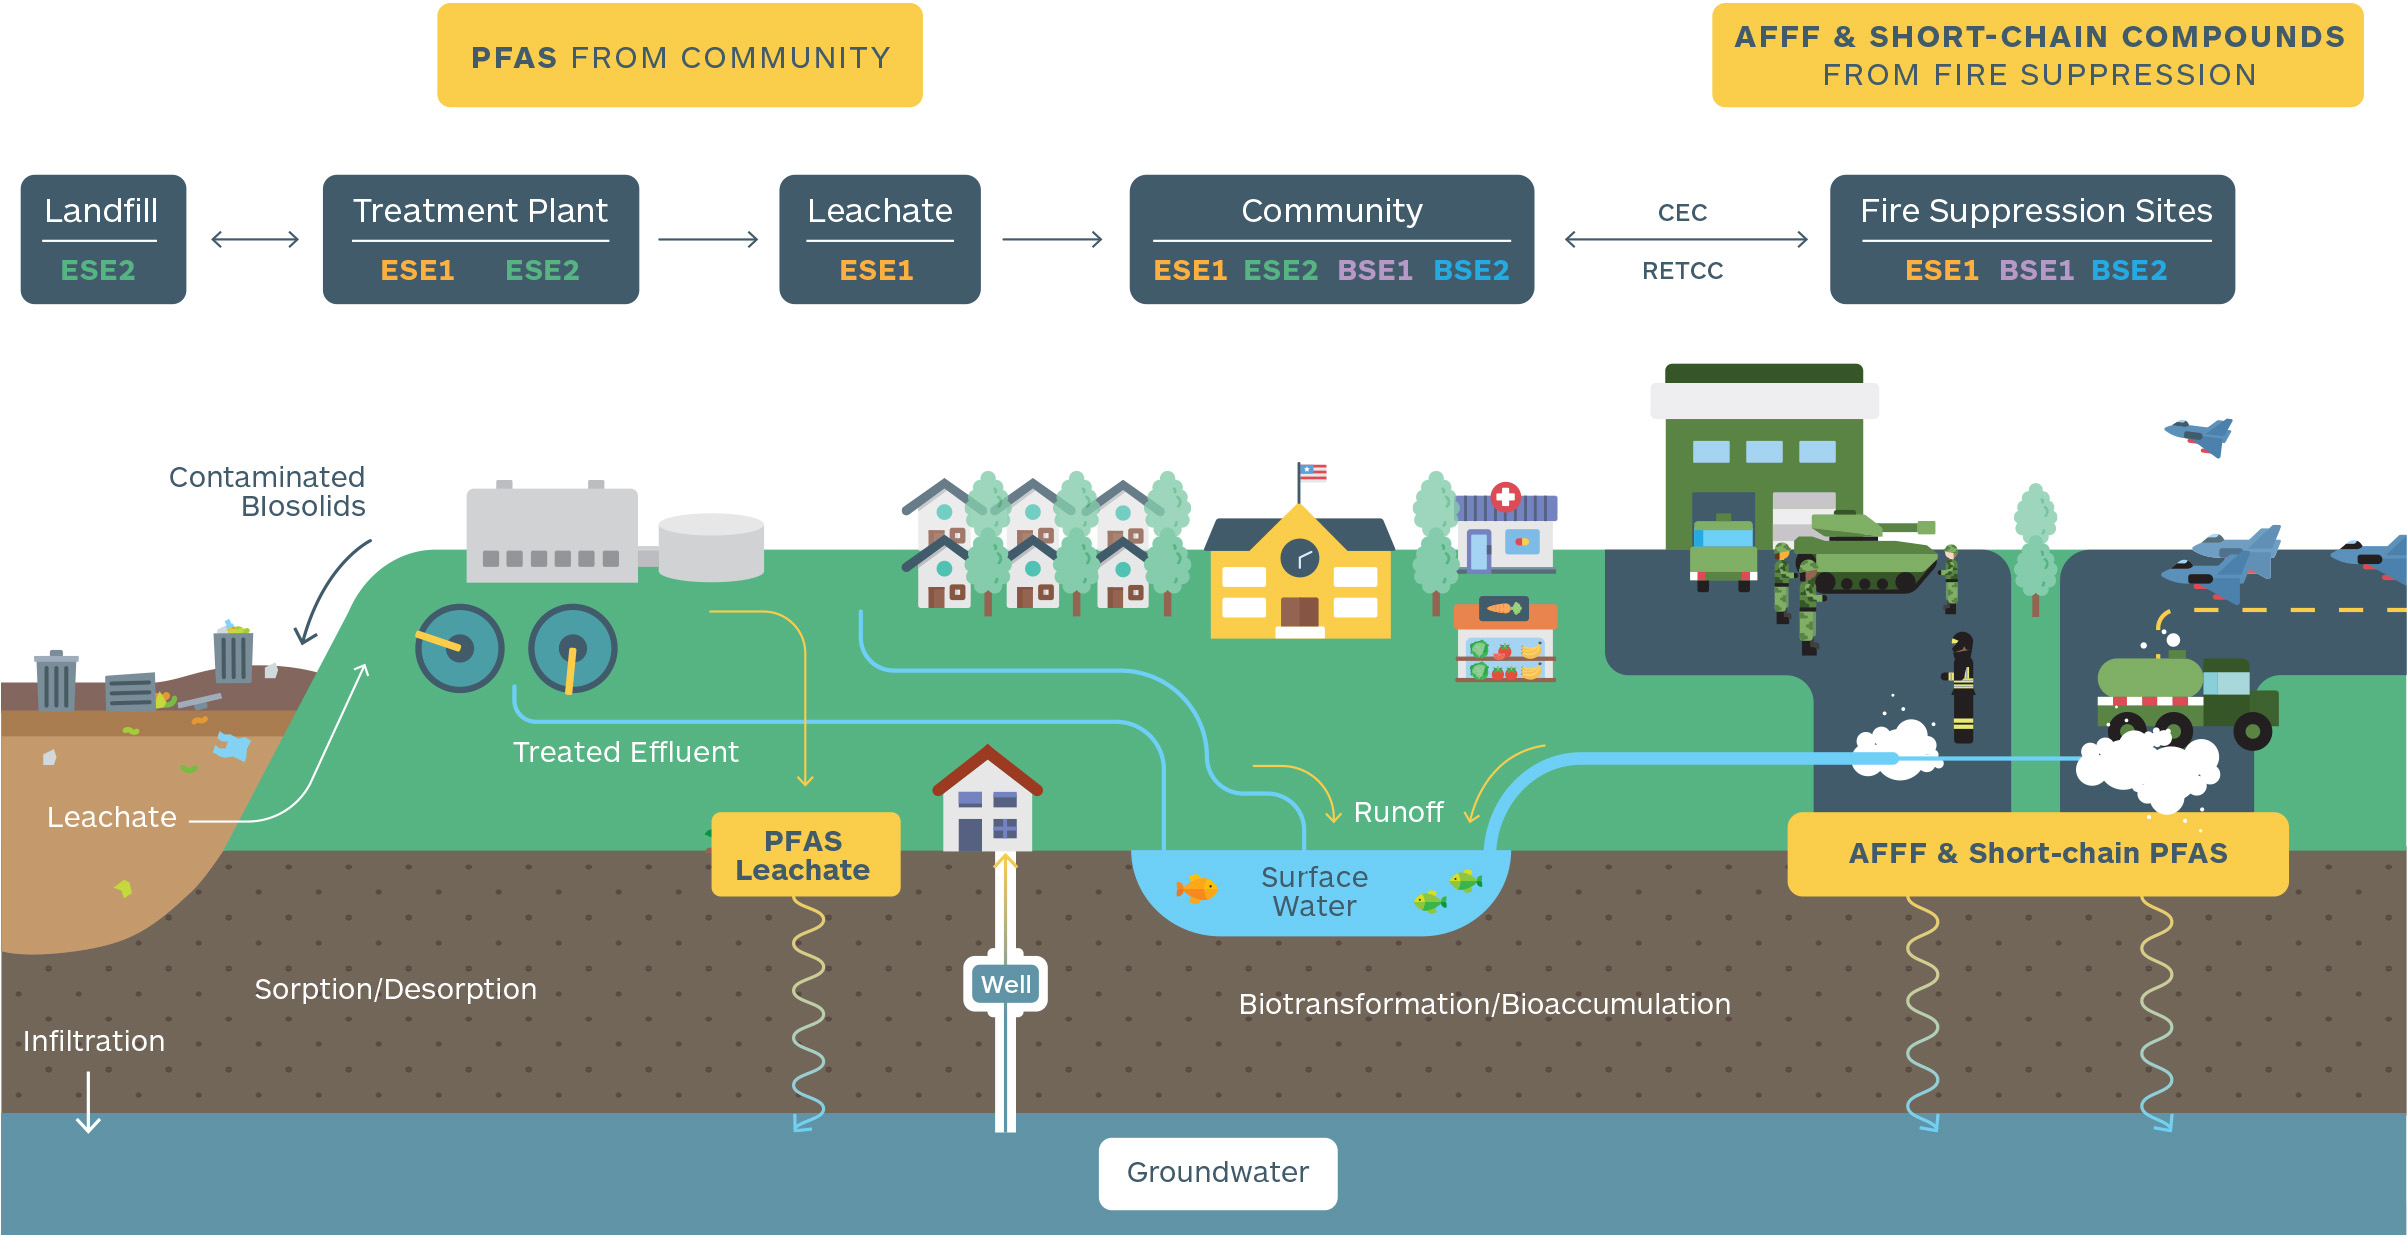 The Ecosystem - Sources and exposure pathways of PFAS and AFFF